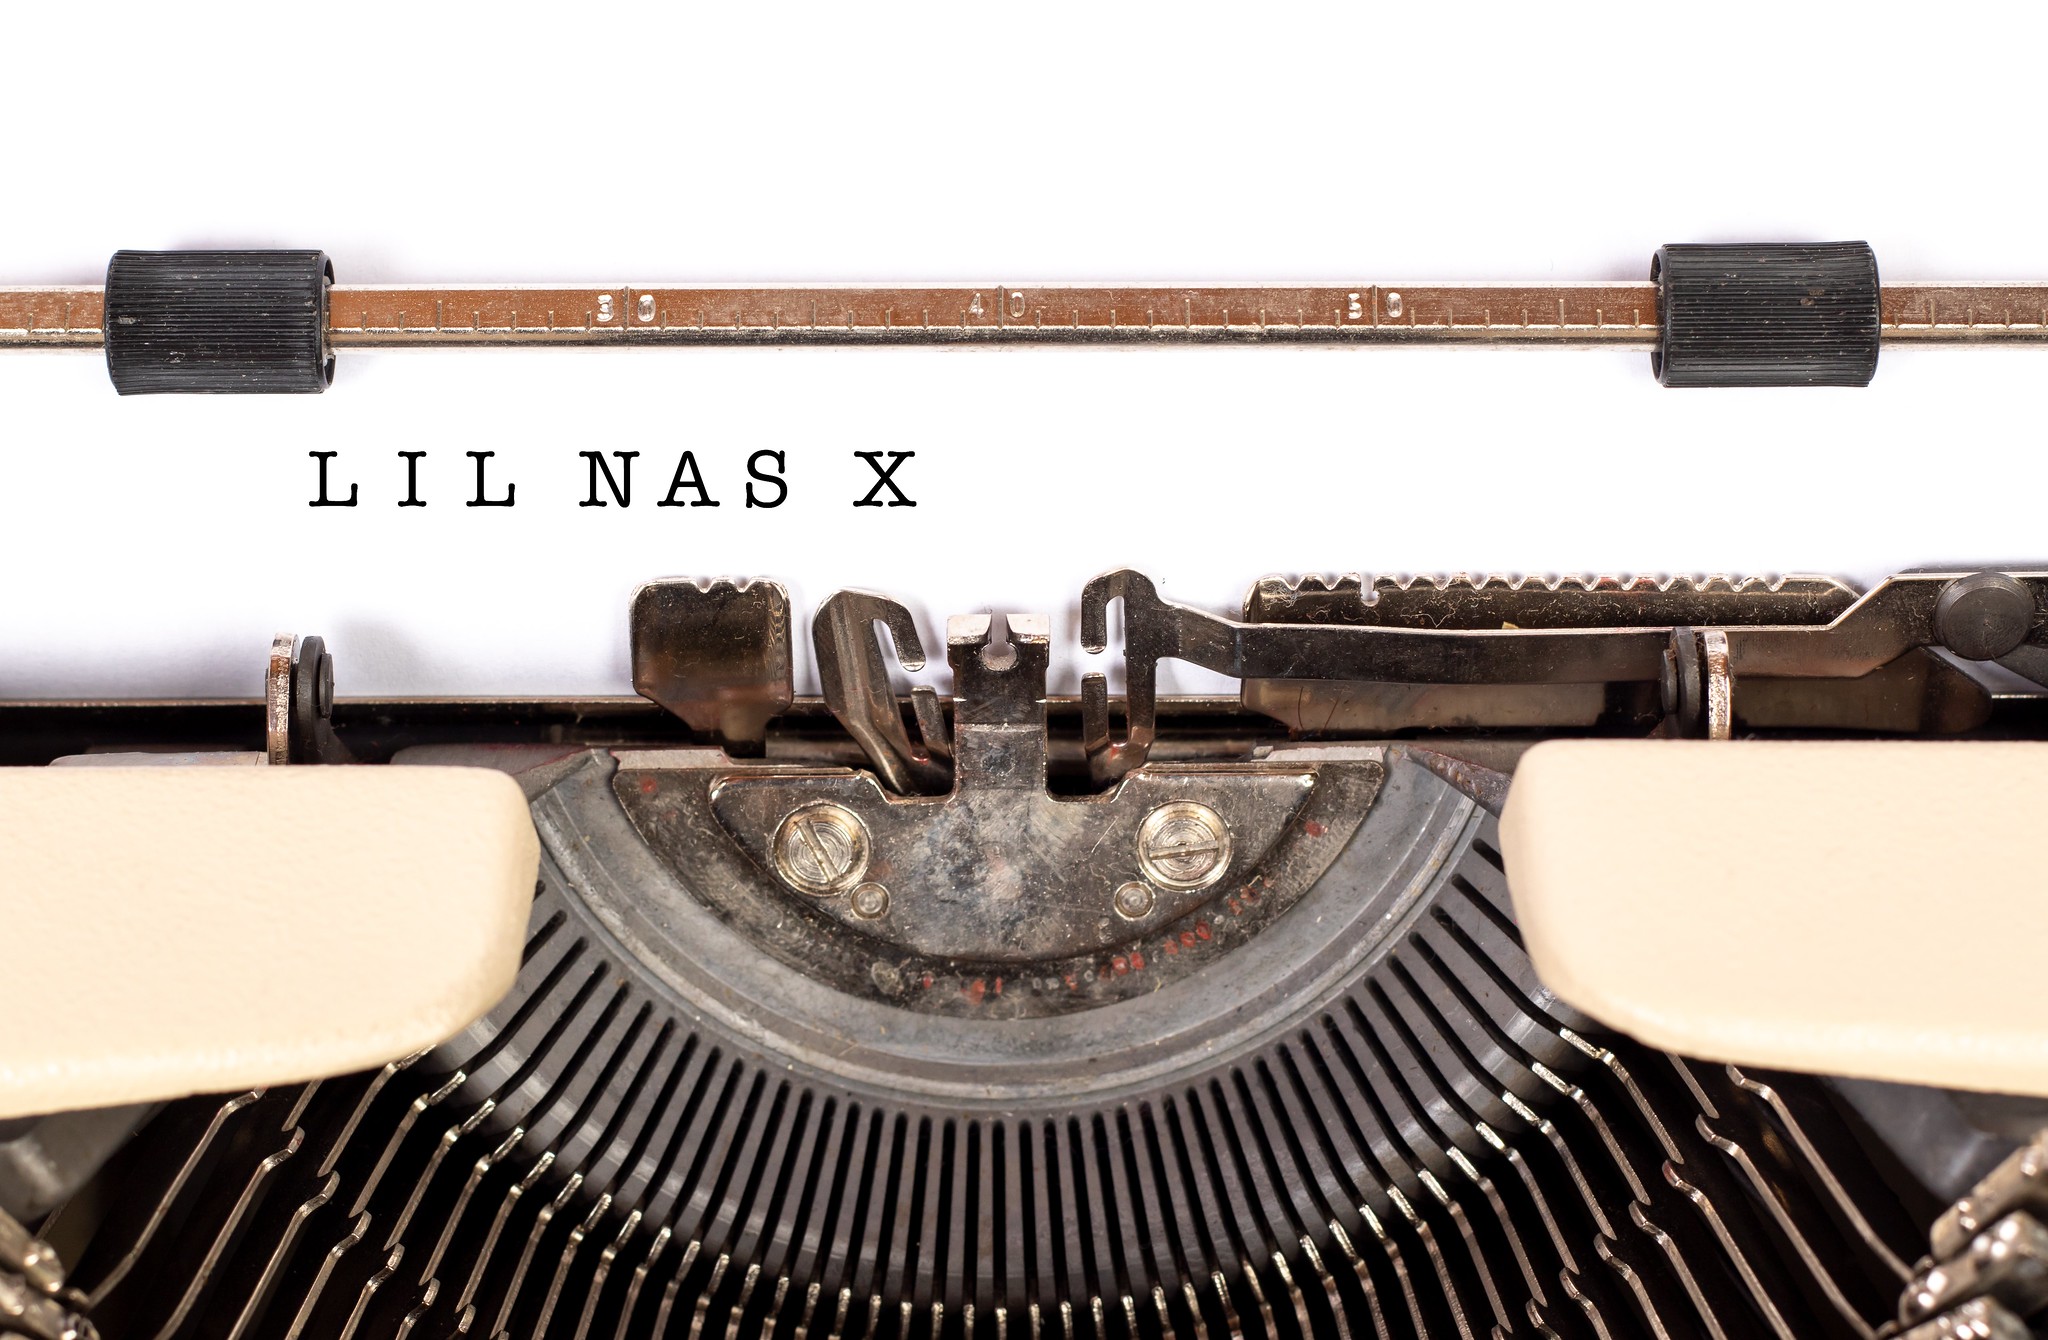 Photograph of a type writer with the words "Lil Nas X" having just been typed